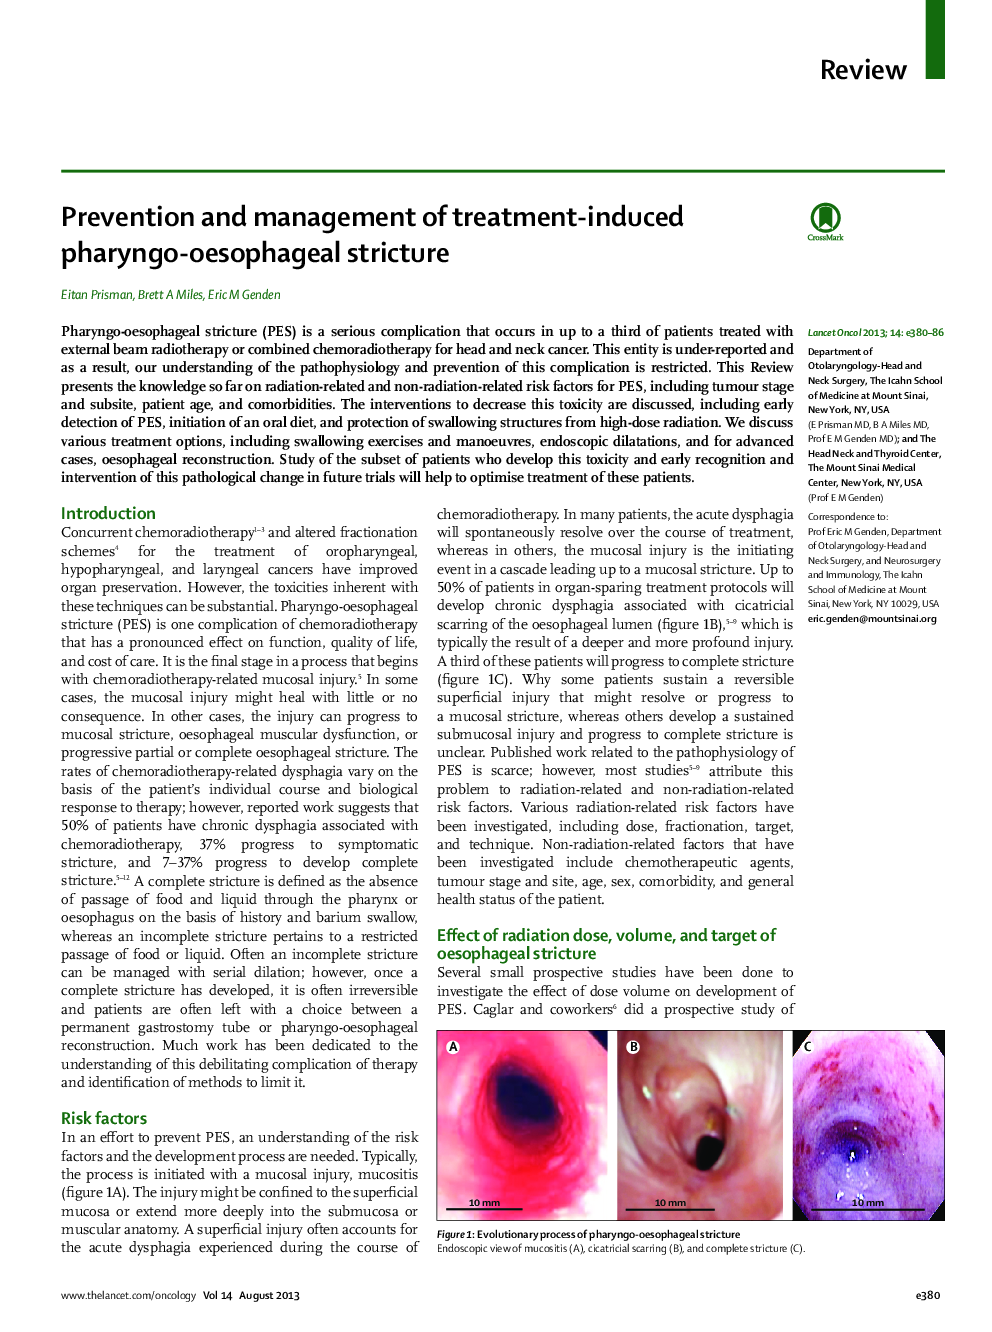 Prevention and management of treatment-induced pharyngo-oesophageal stricture